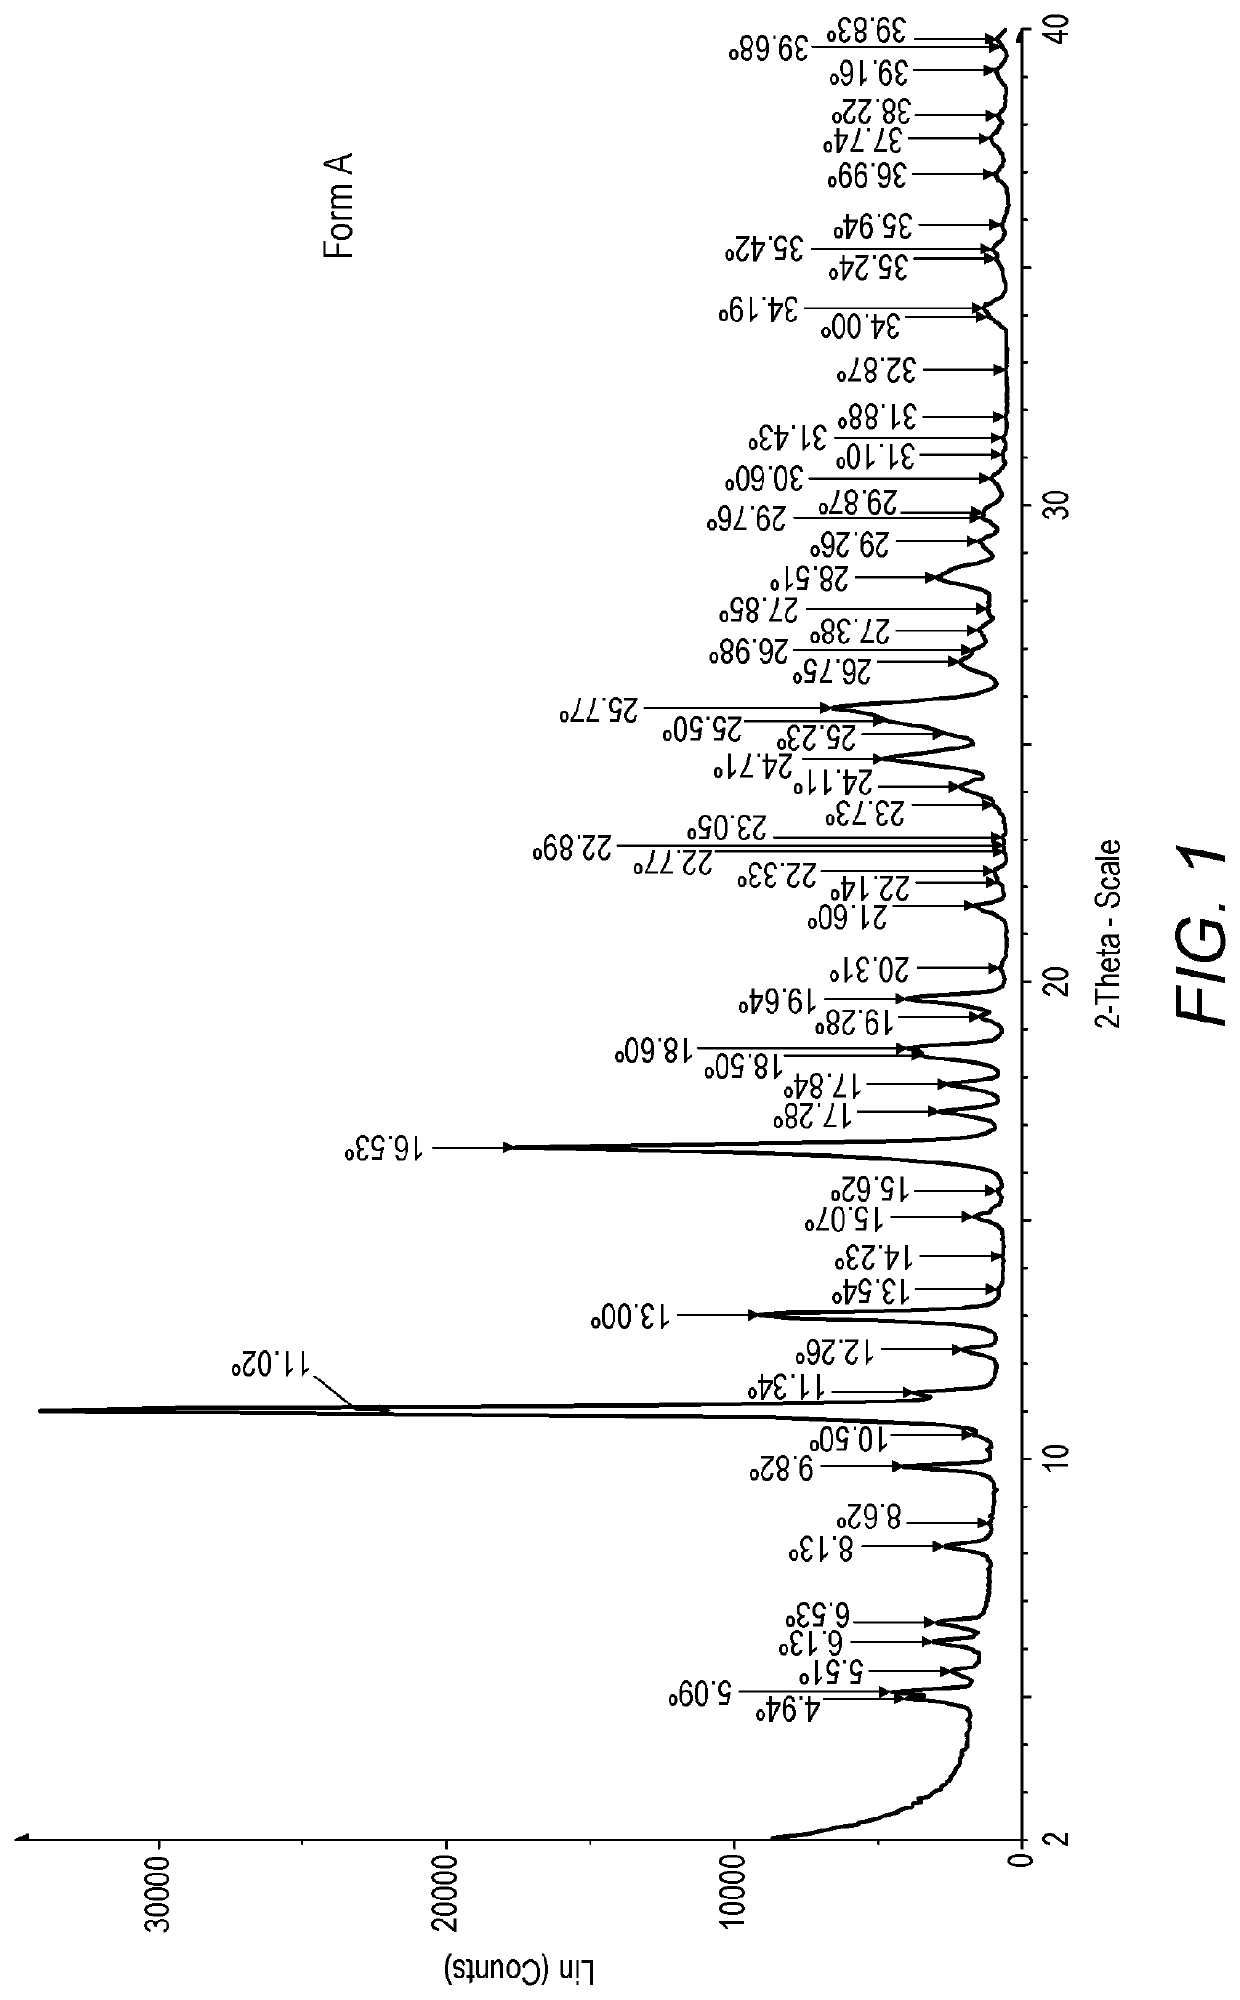 Process for the preparation of ridinilazole and crystalline forms thereof